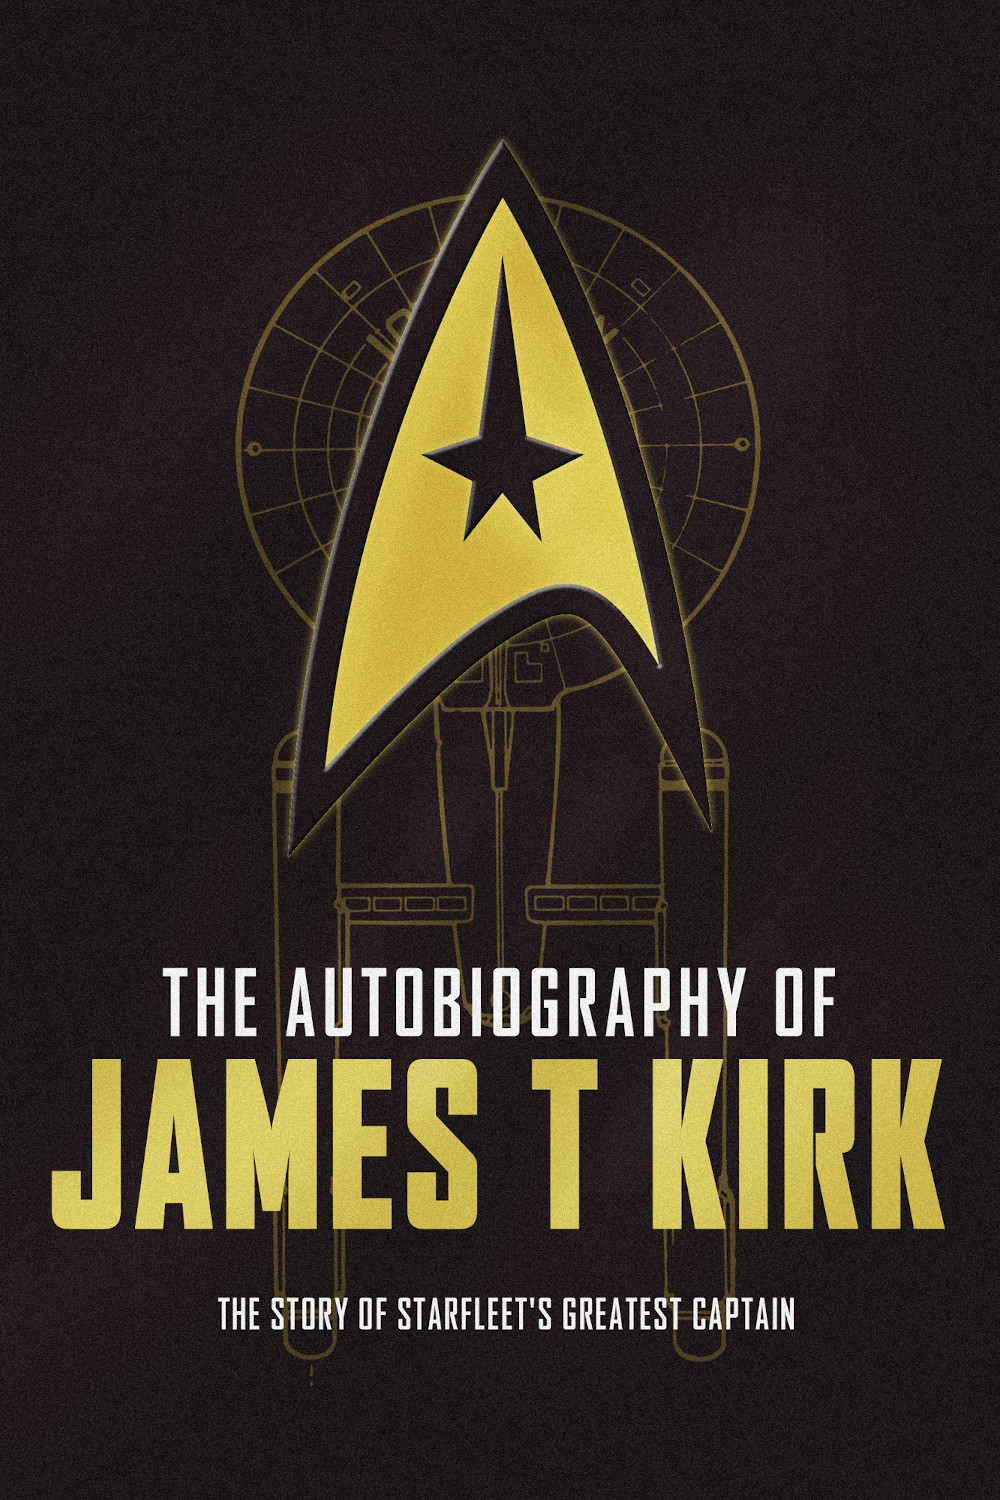 The Autobiography of James T. Kirk (Sep 2015)